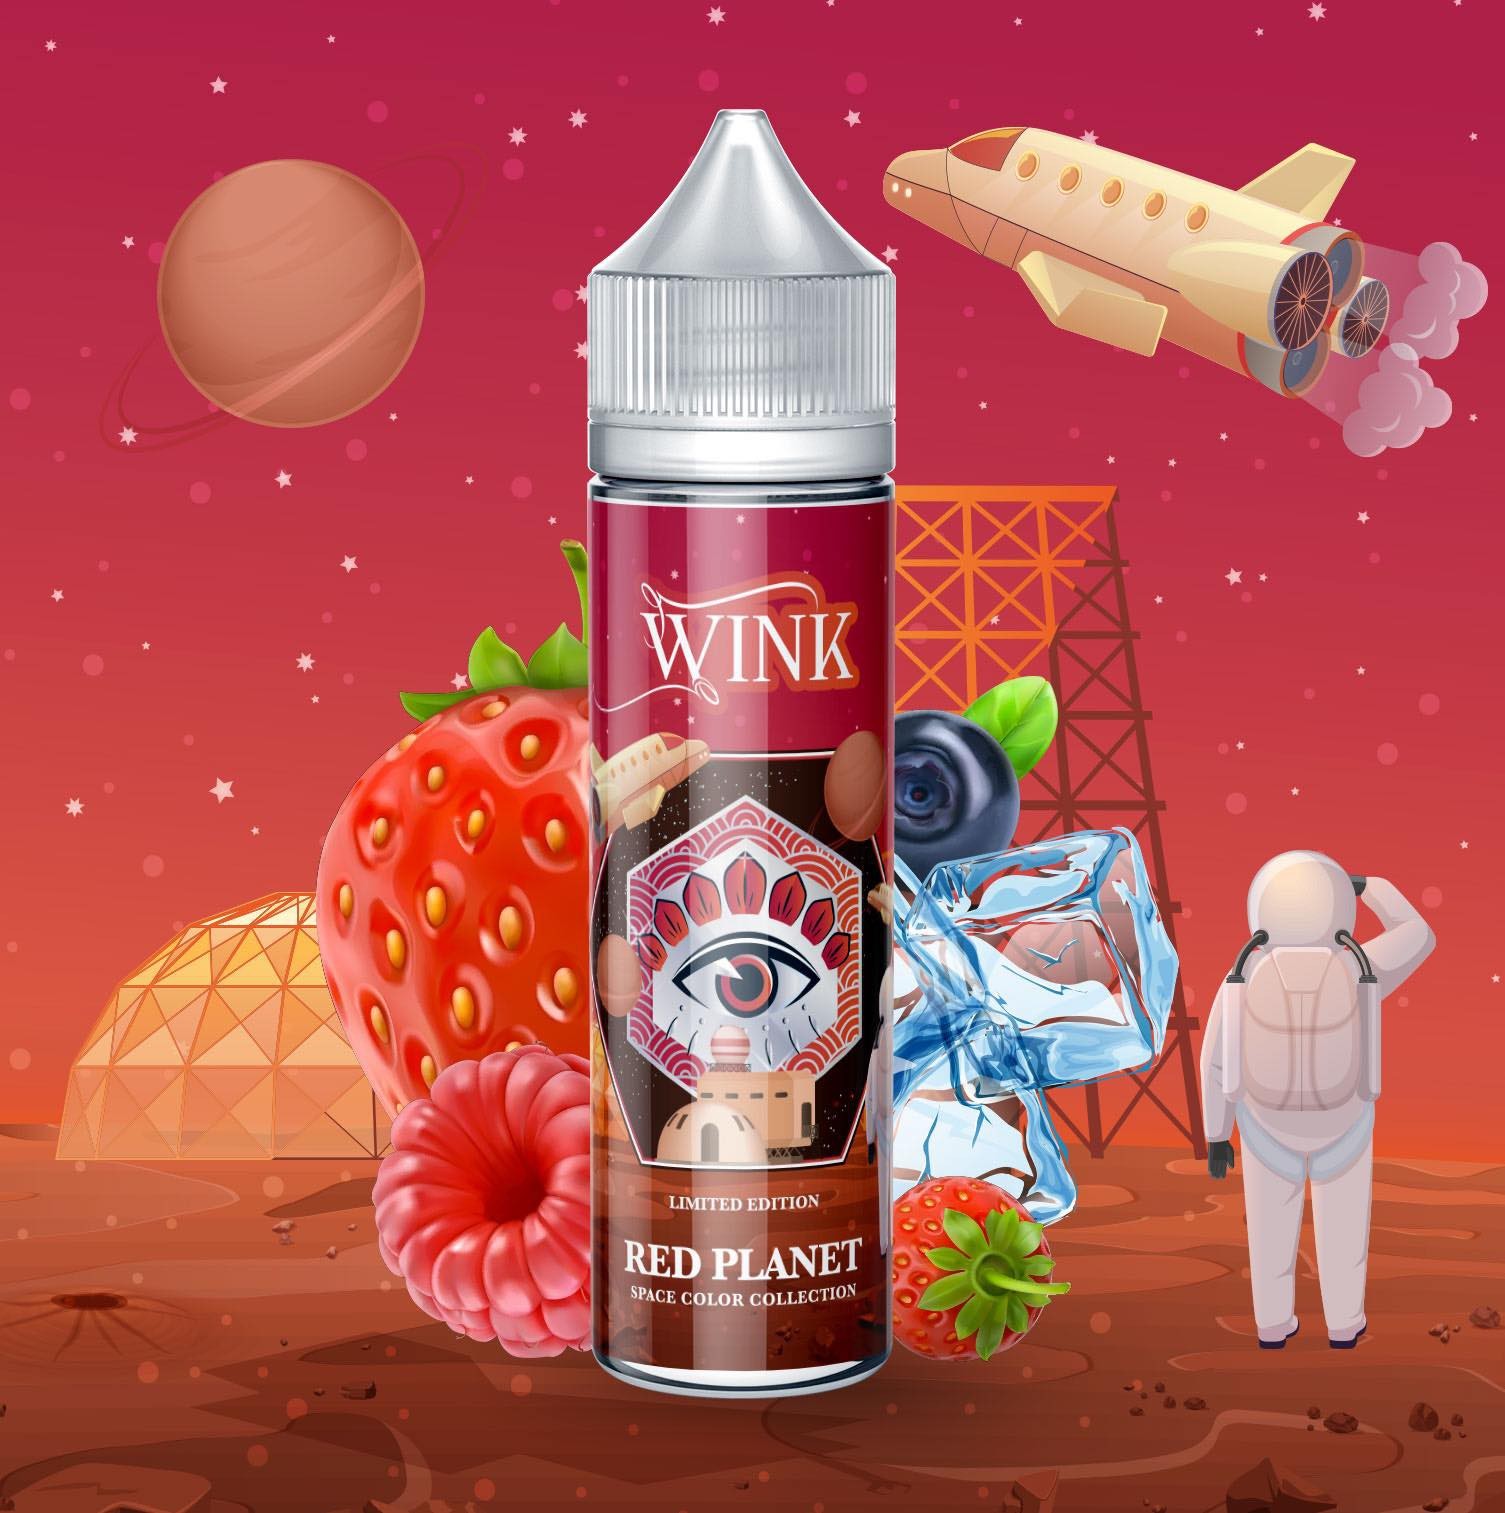 Red Planet - Wink - Space Color Collection 50ml